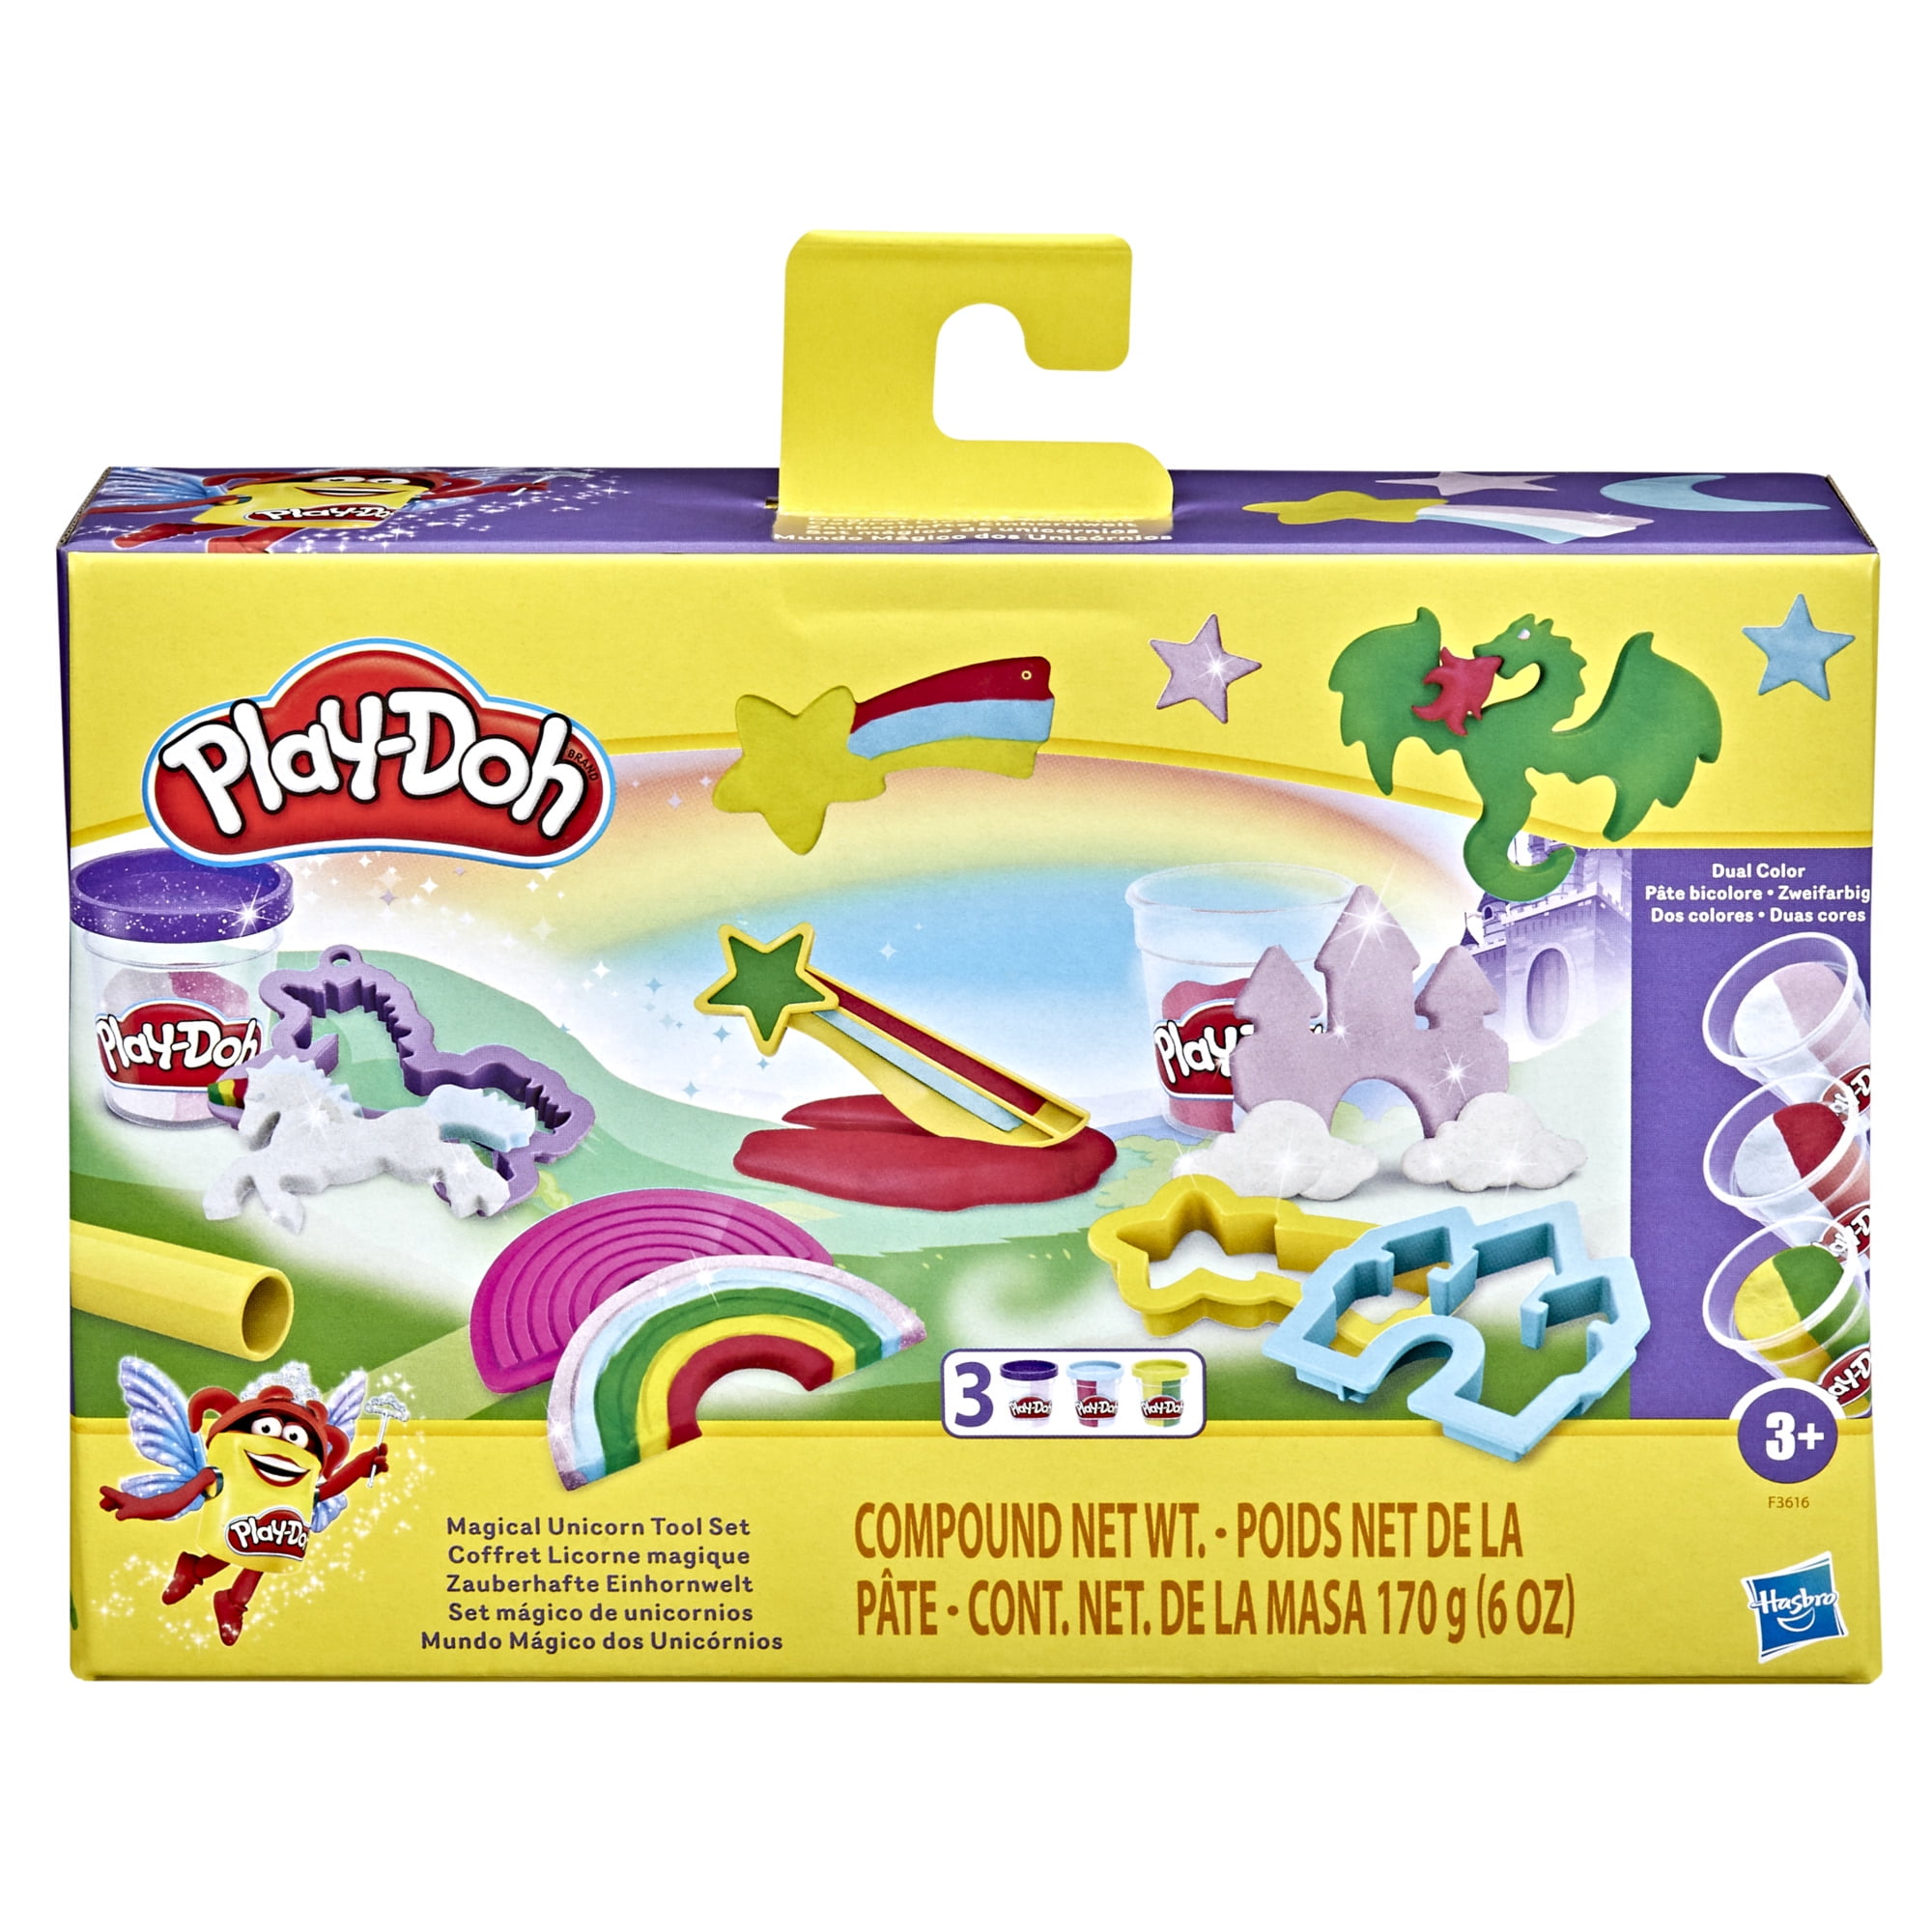 Play-Doh Magical Unicorn Tool Set for Kids 3 Years and Up with 3 Cans